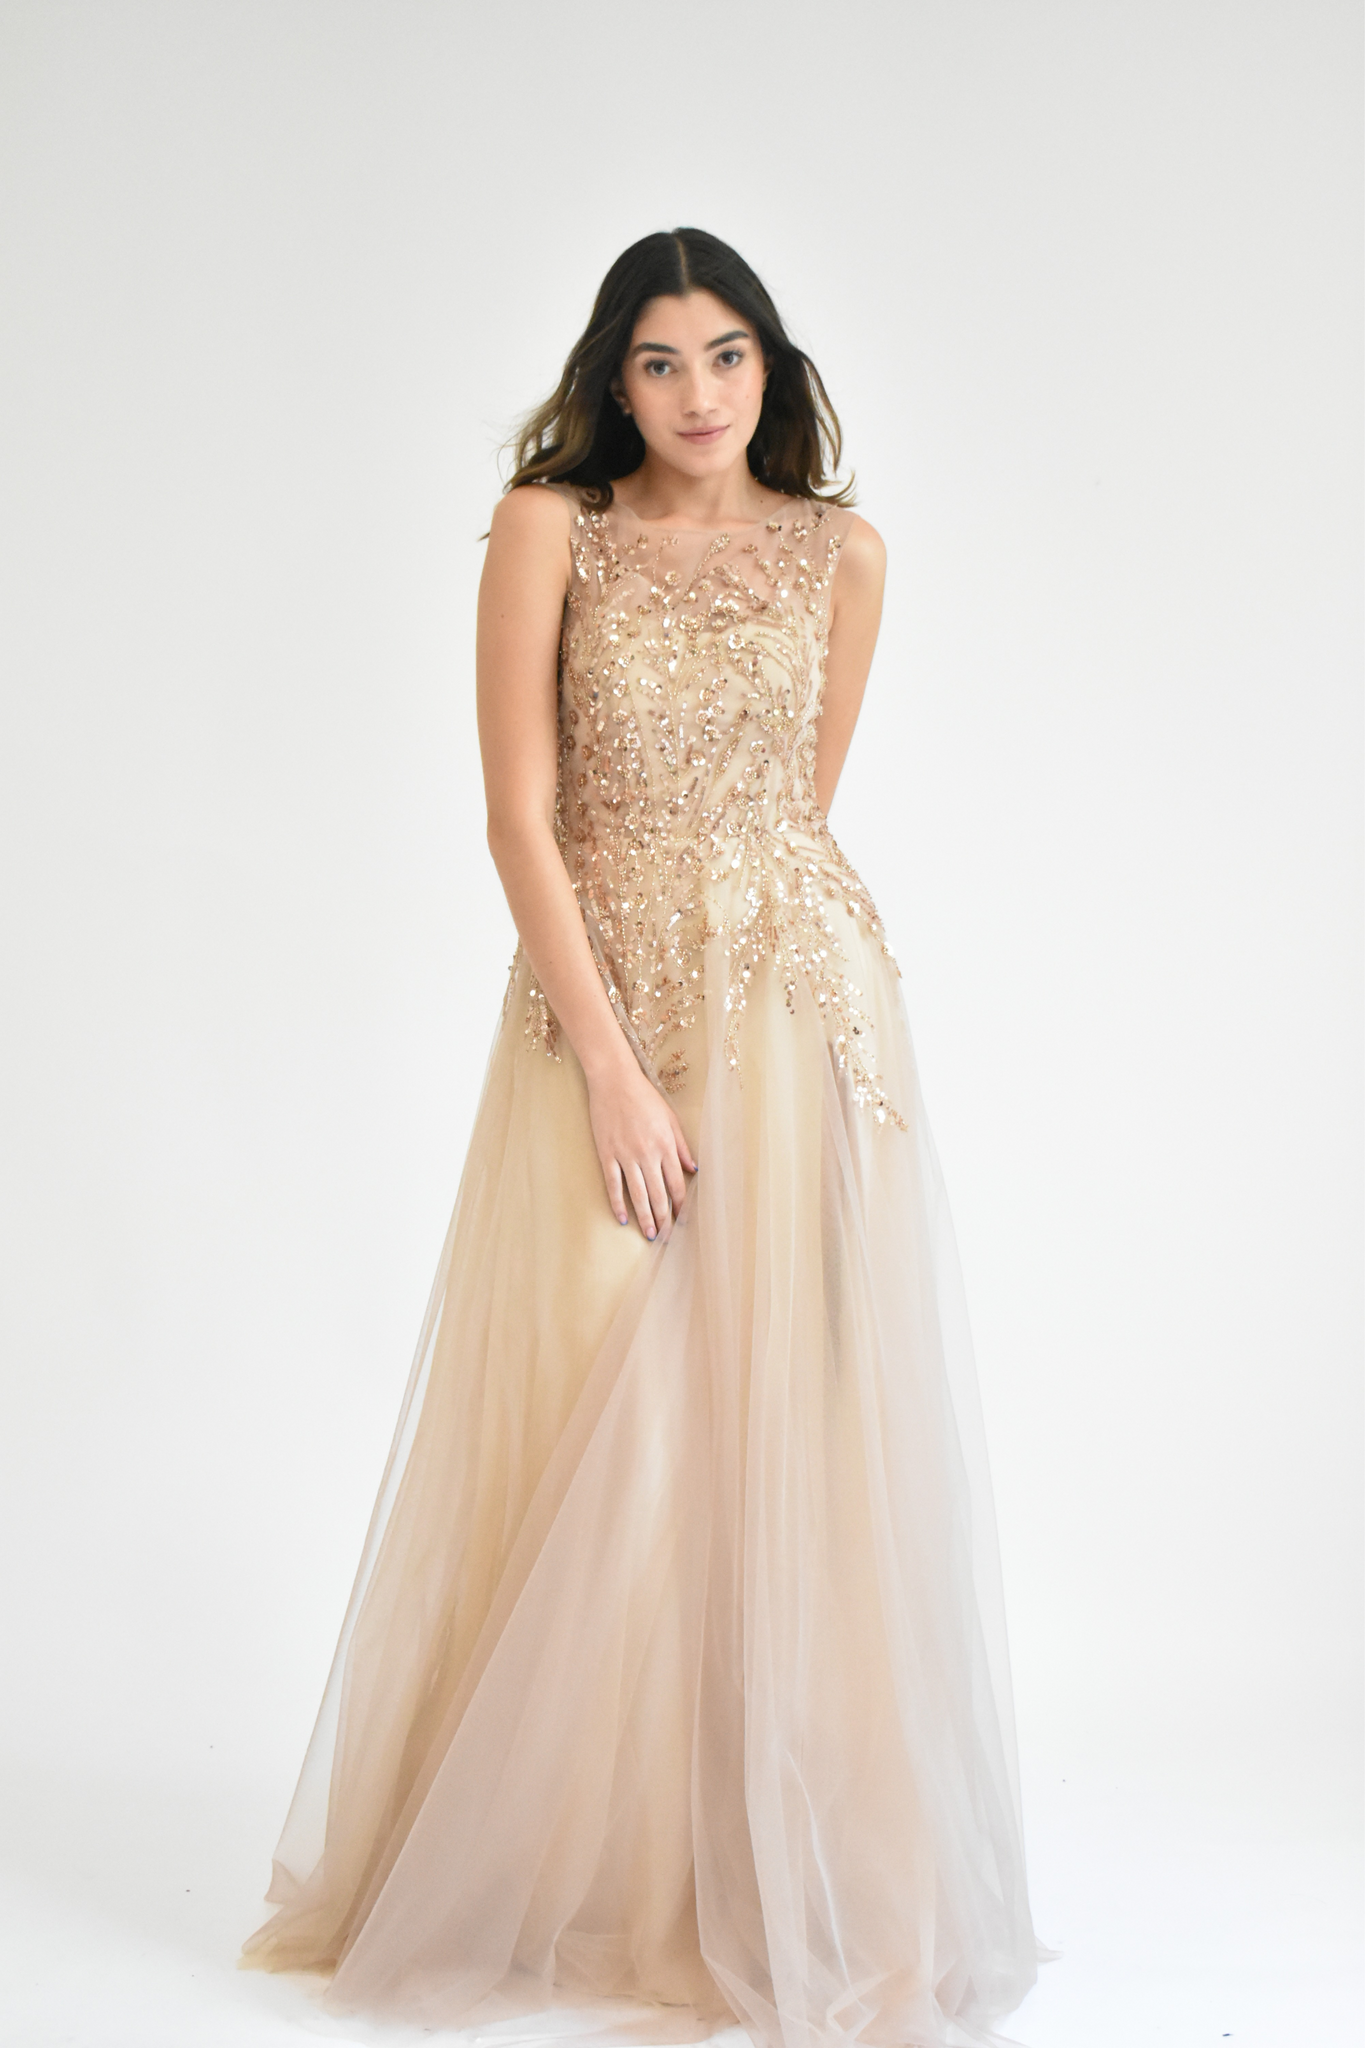 TULLE GOWN WITH GOLD EMBROIDERY DETAILS